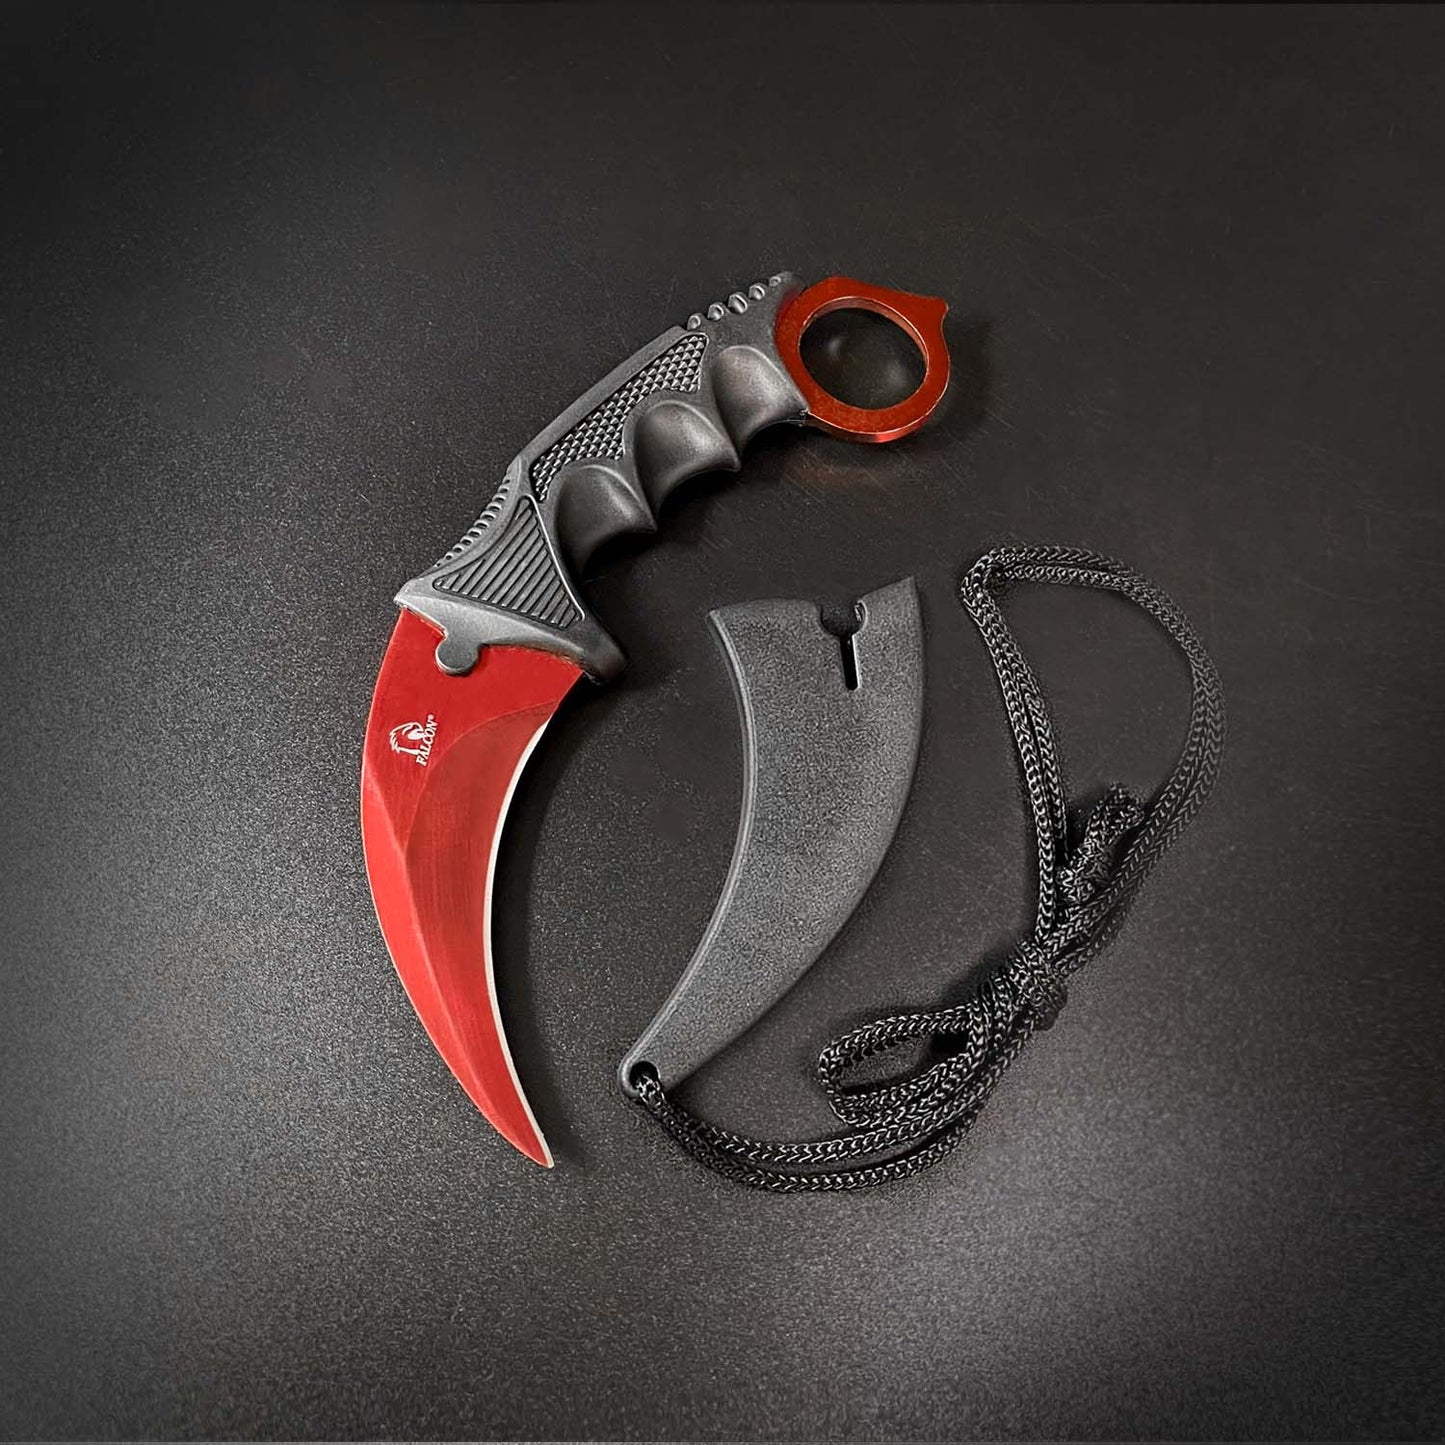 Falcon 5 Pieces Red Hunting Set (Machete, Karambit, Throwing Knives.)